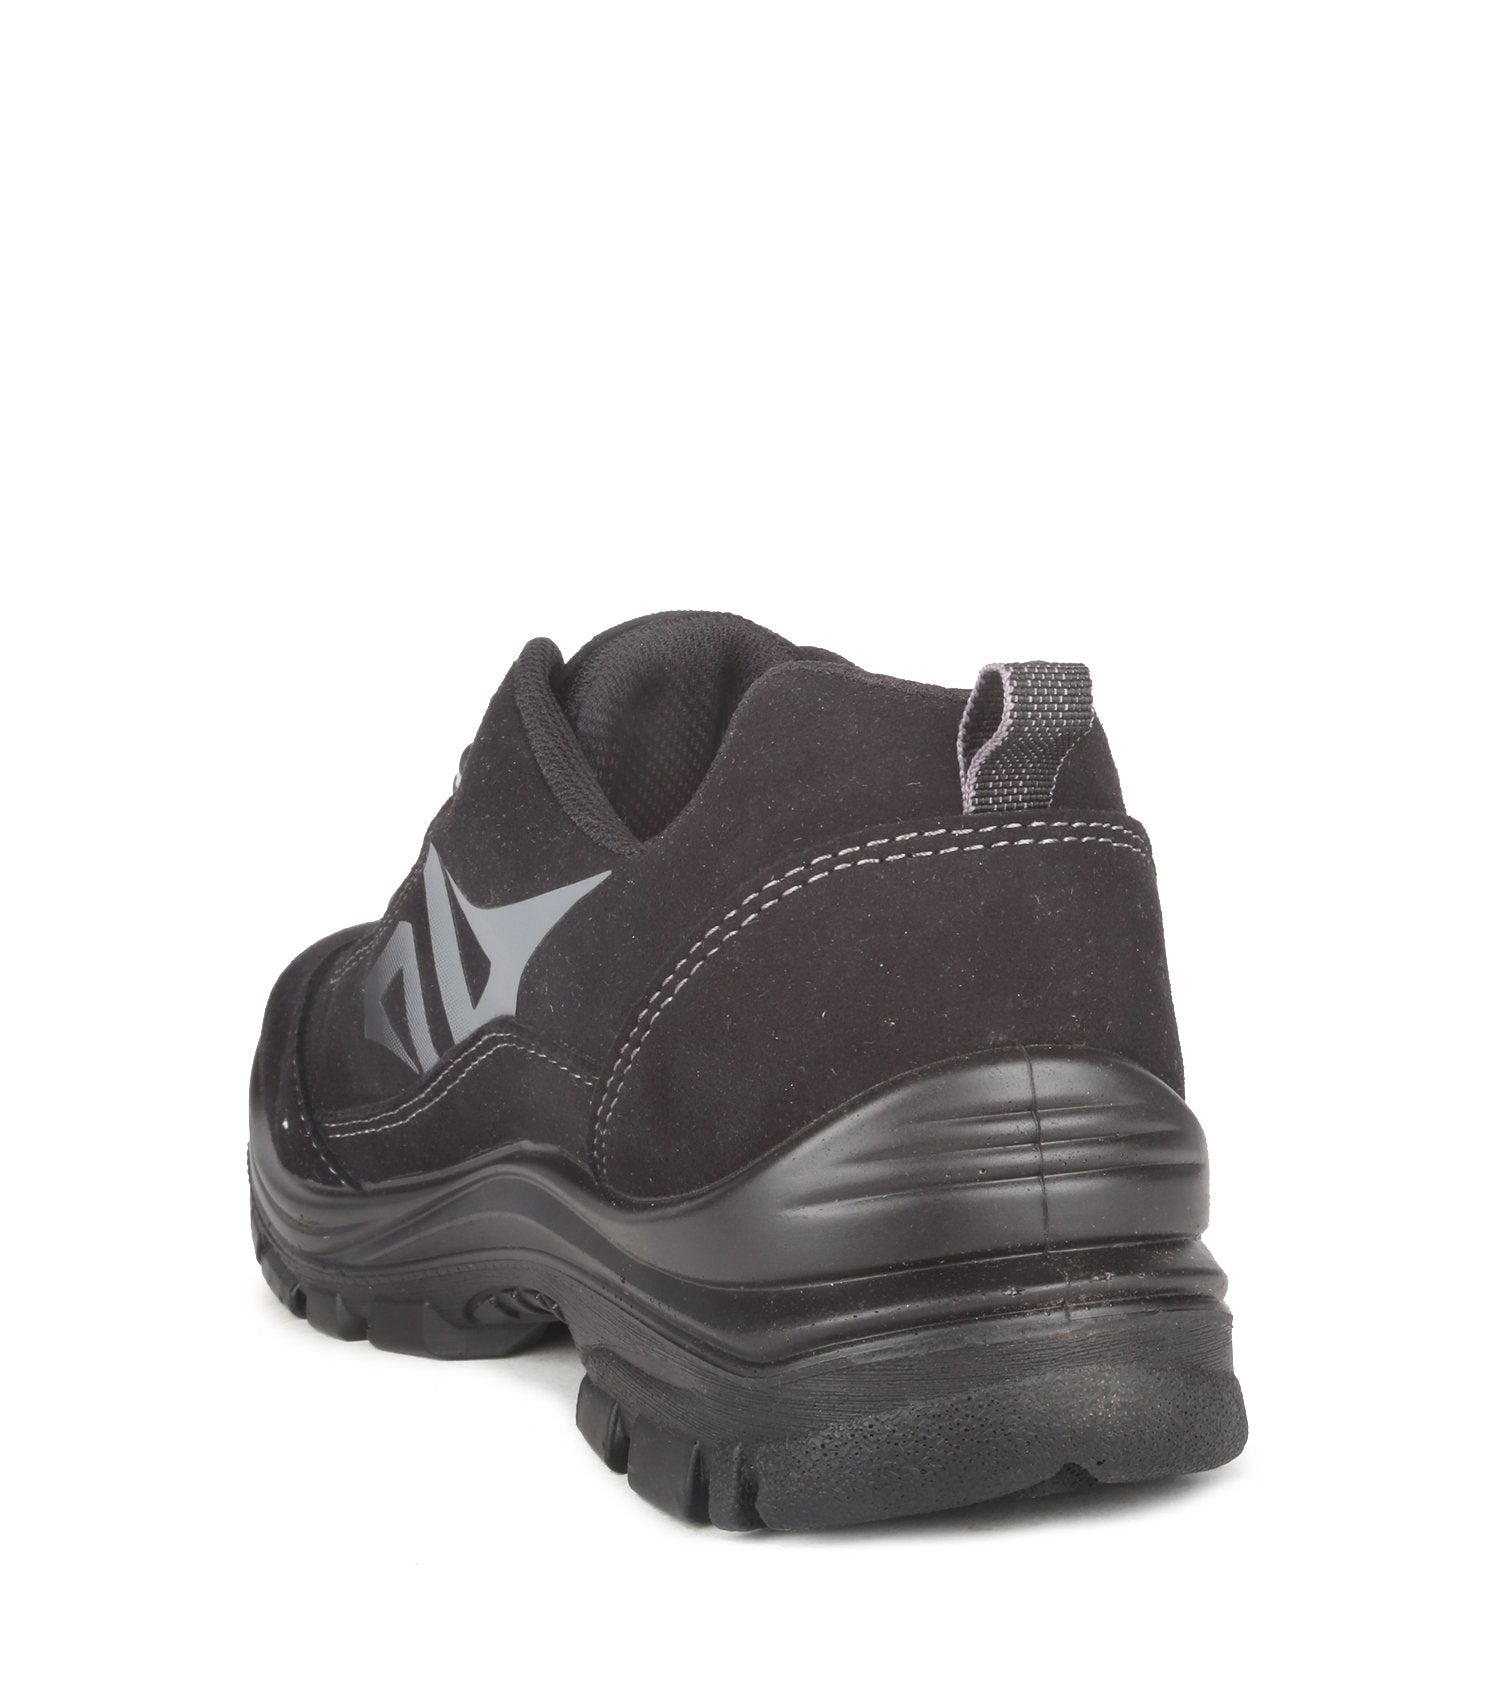 Acton Profast Flexible Metal Free Athletic Hiker Safety Shoe | Sizes 6-16 Work Boots - Cleanflow